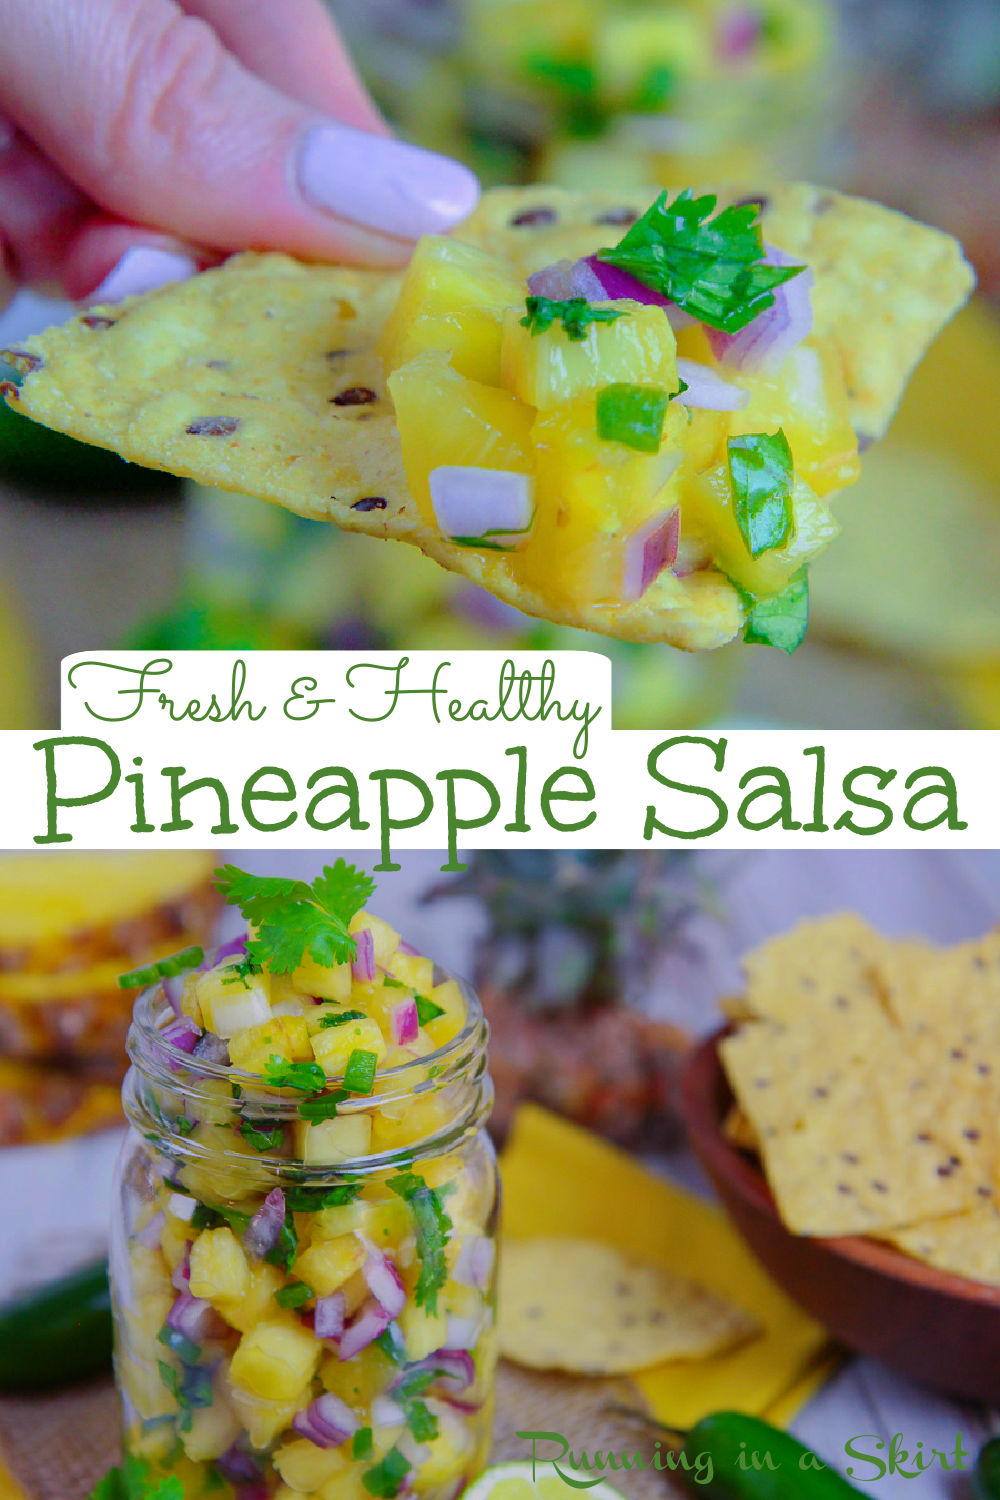 Pineapple Salsa recipe- Easy, Healthy & Fresh Fruit Salsa that's perfect for chips, chicken, salmon, or fish! Great with fish tacos or grilled salmon tacos. Made with just five ingredients - pineapple, jalapeno, red onion, cilantro, and lime. This is the best quick and easy Pineapple Salsa ever! The perfect Mexican flavors. Vegan, Vegetarian, Gluten Free / Running in a Skirt #pineapplesalsa #fruitsalsa #mexican #tacos #healthyrecipes via @juliewunder